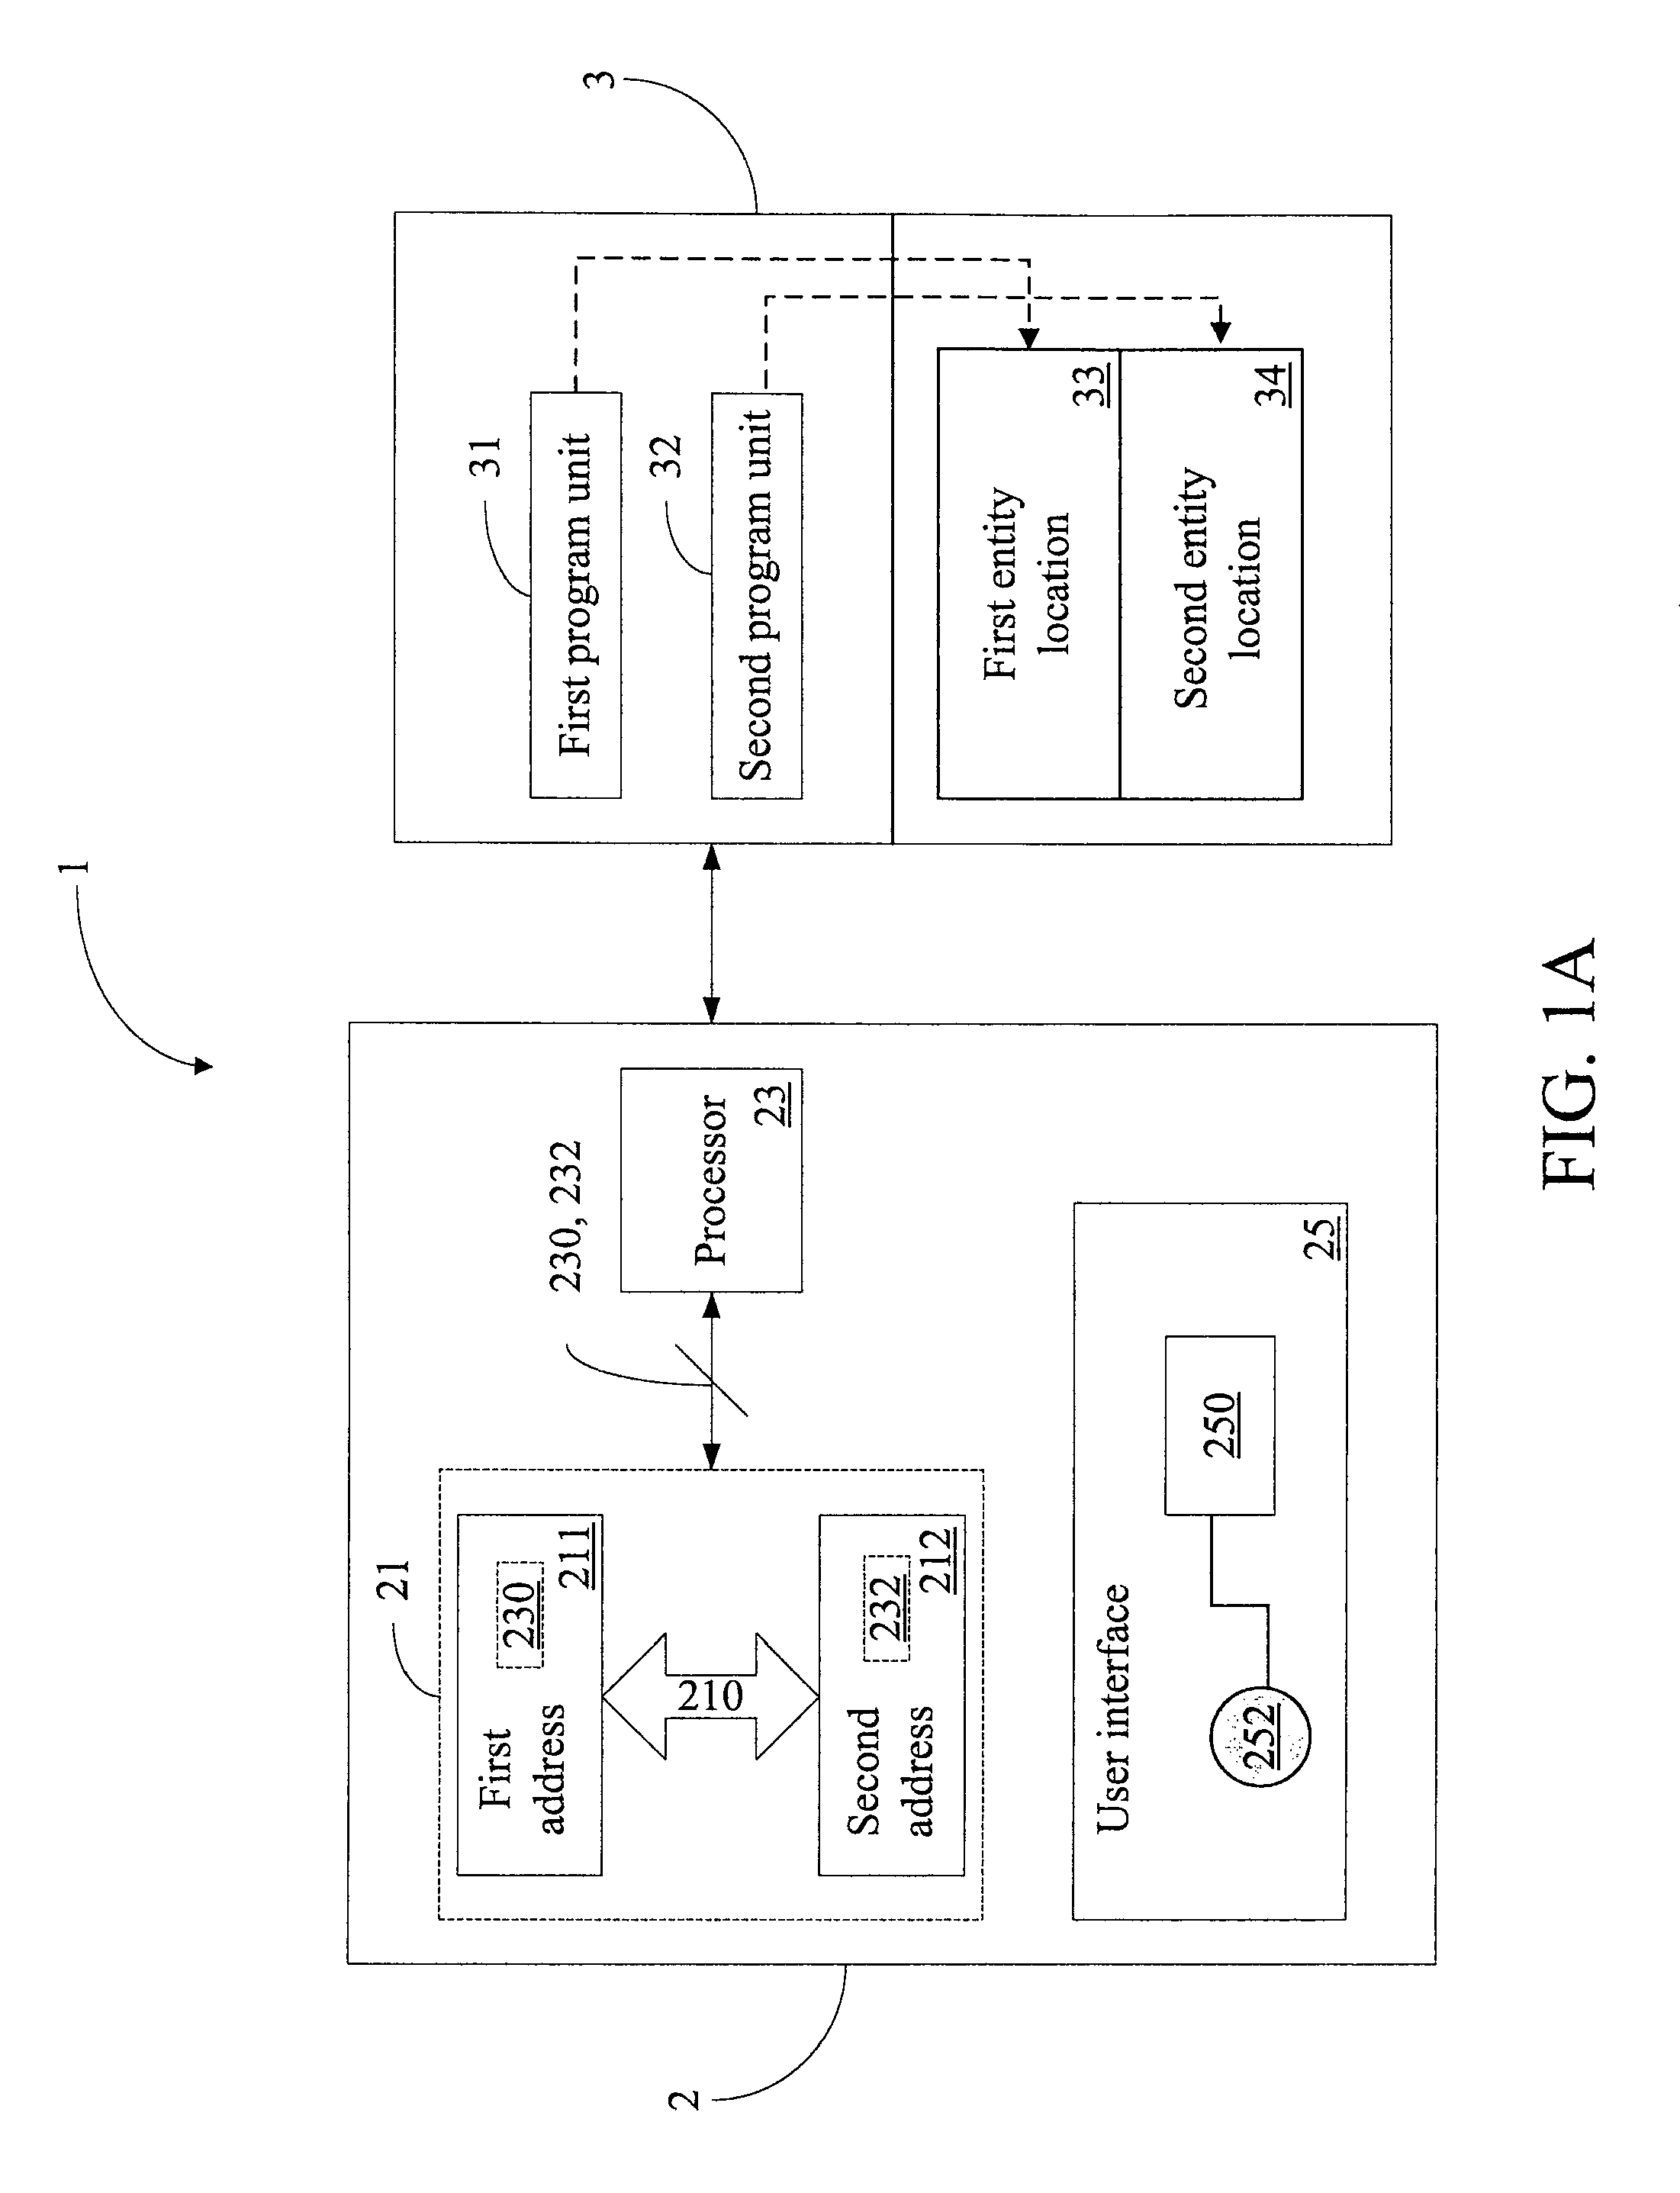 Human machine interface device and interface integration method thereof